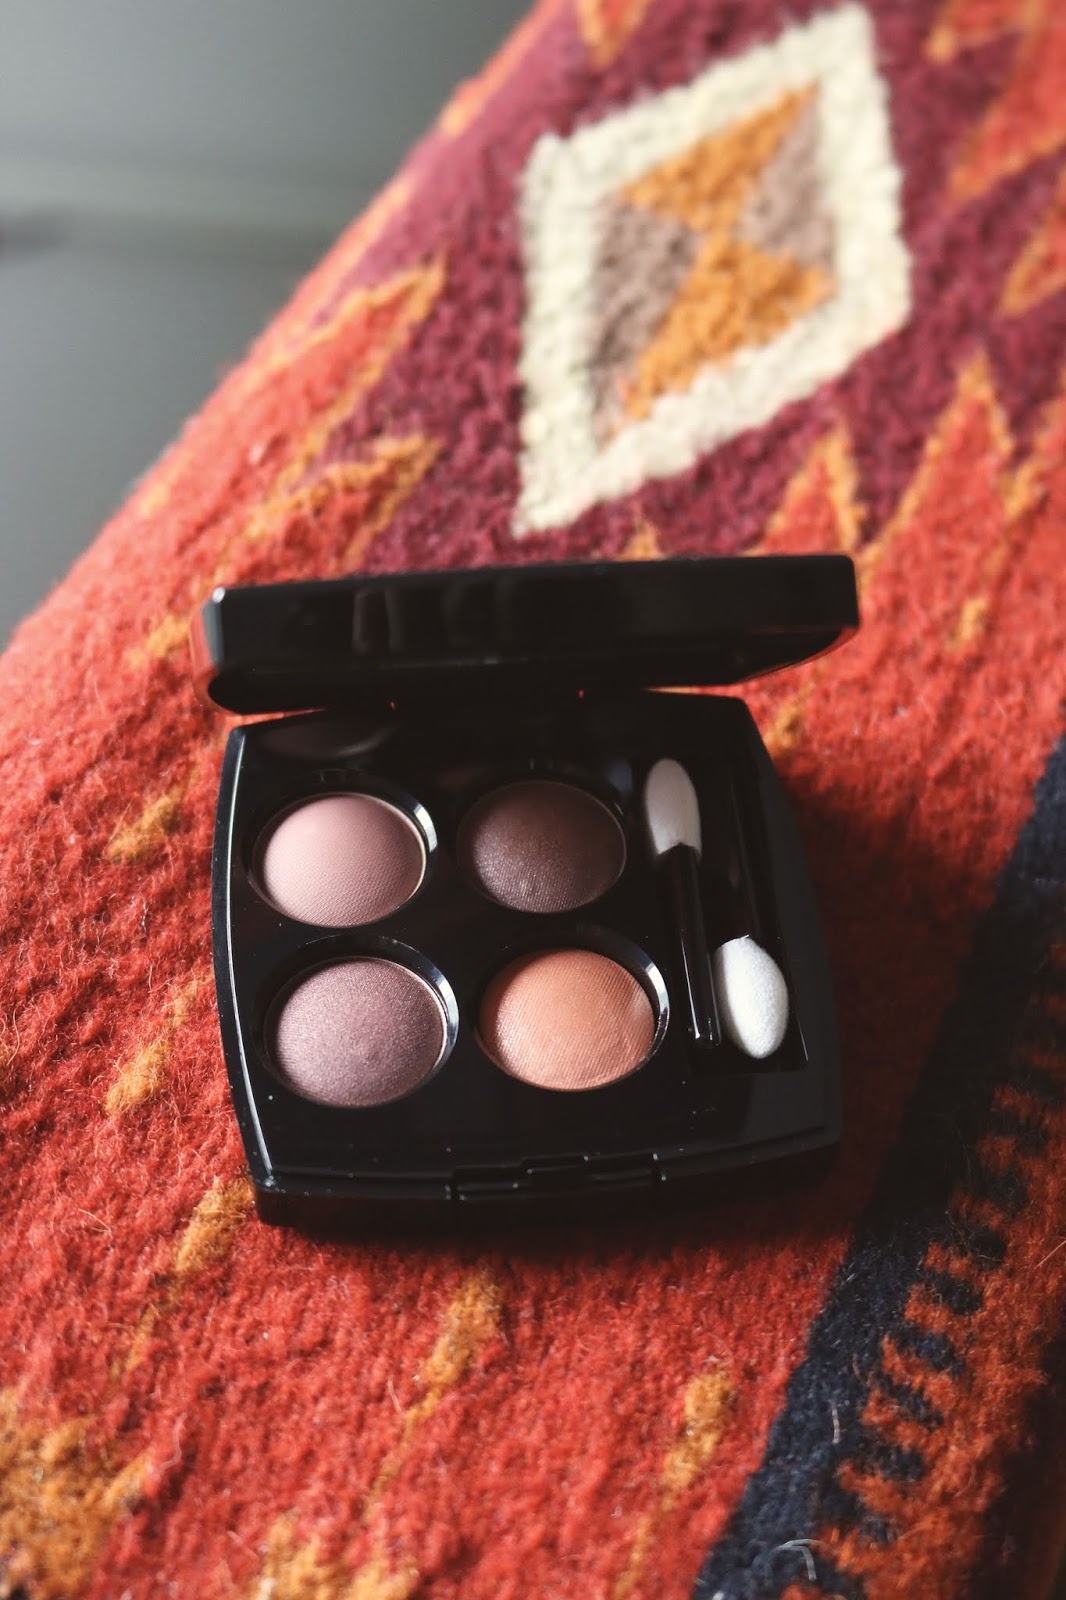 CHANEL Les 4 Ombres Multi-Effect Quadra Eyeshadow: A quick review